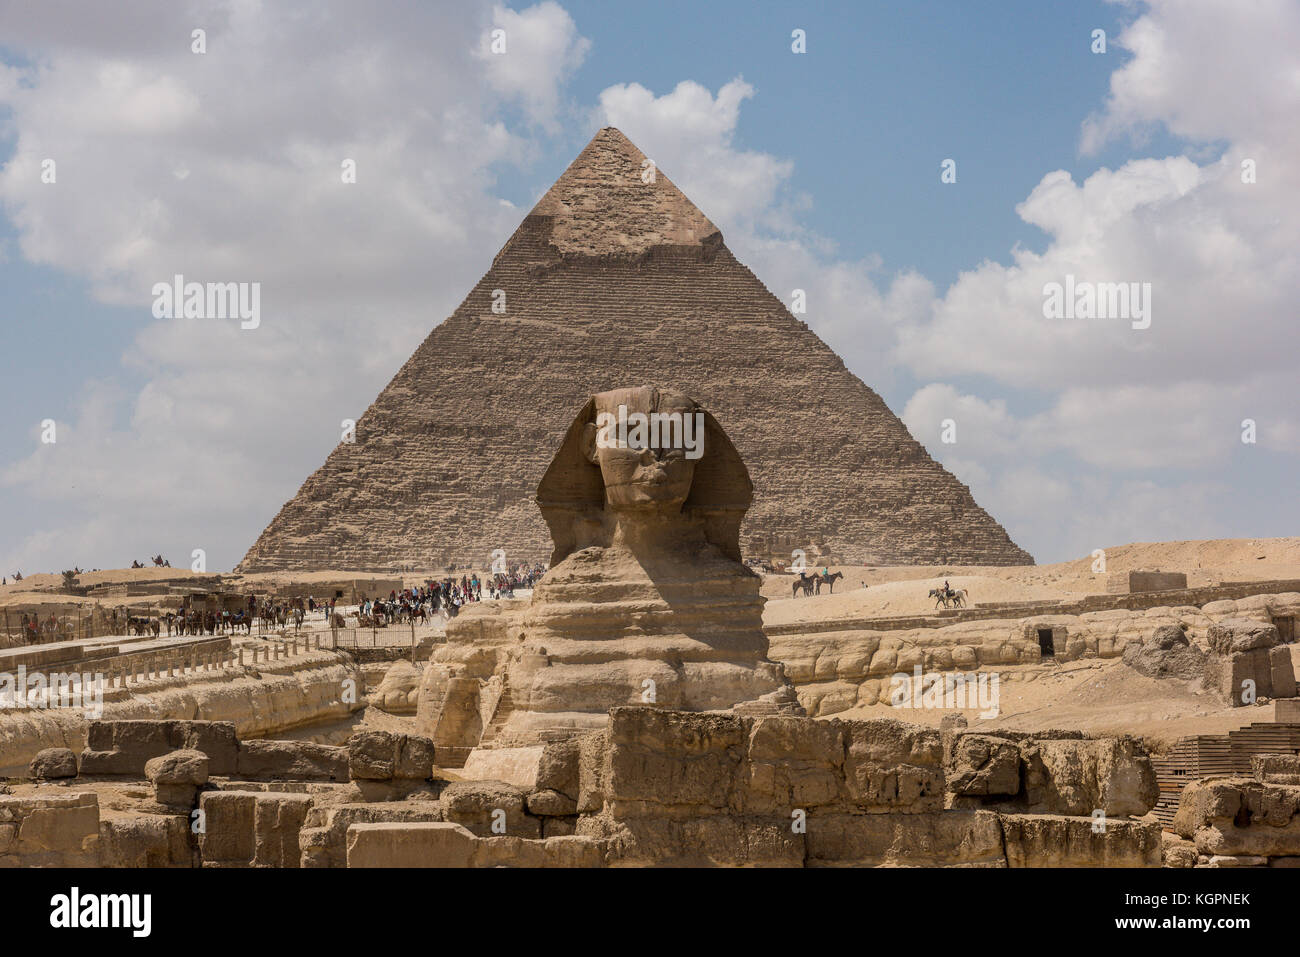 Great Sphinx in front of the Pyramid of Khafre on the Giza Plateau outside of Cairo, Egypt. Stock Photo